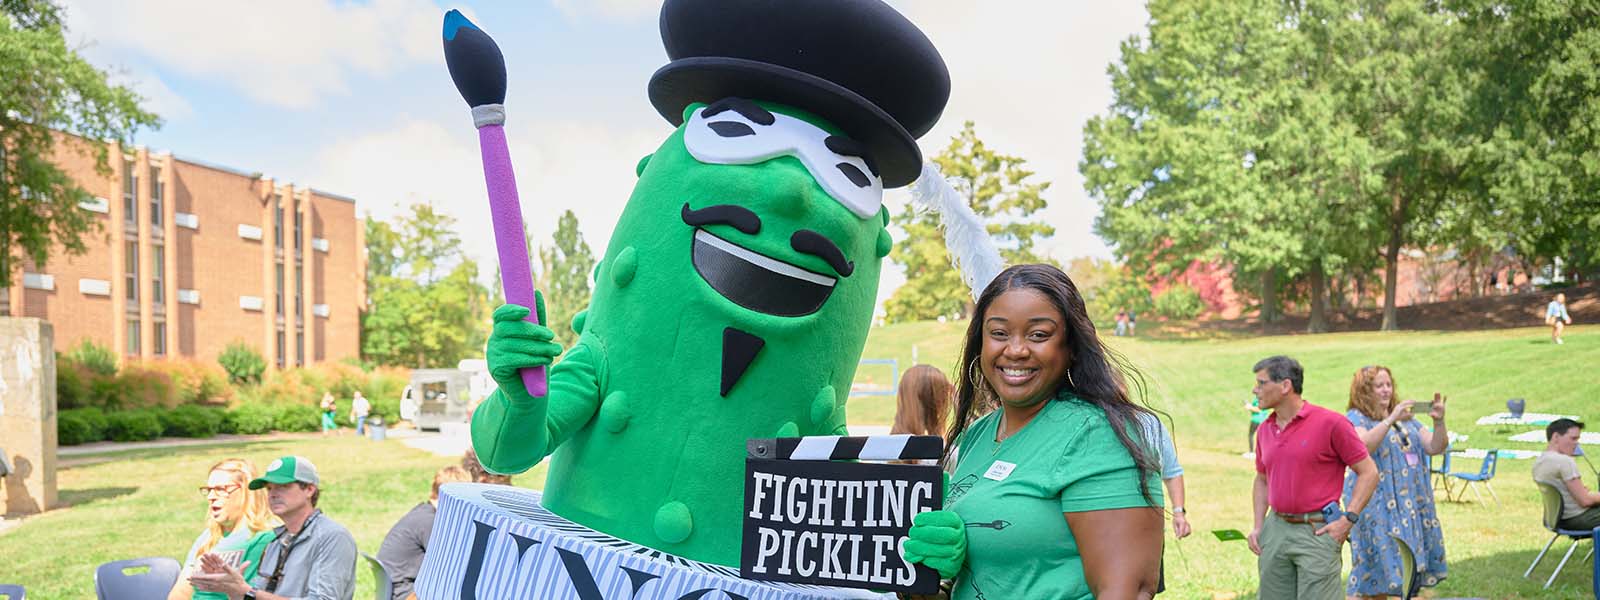 The Fighting Pickle mascot at the 2023 UNCSA Homecoming